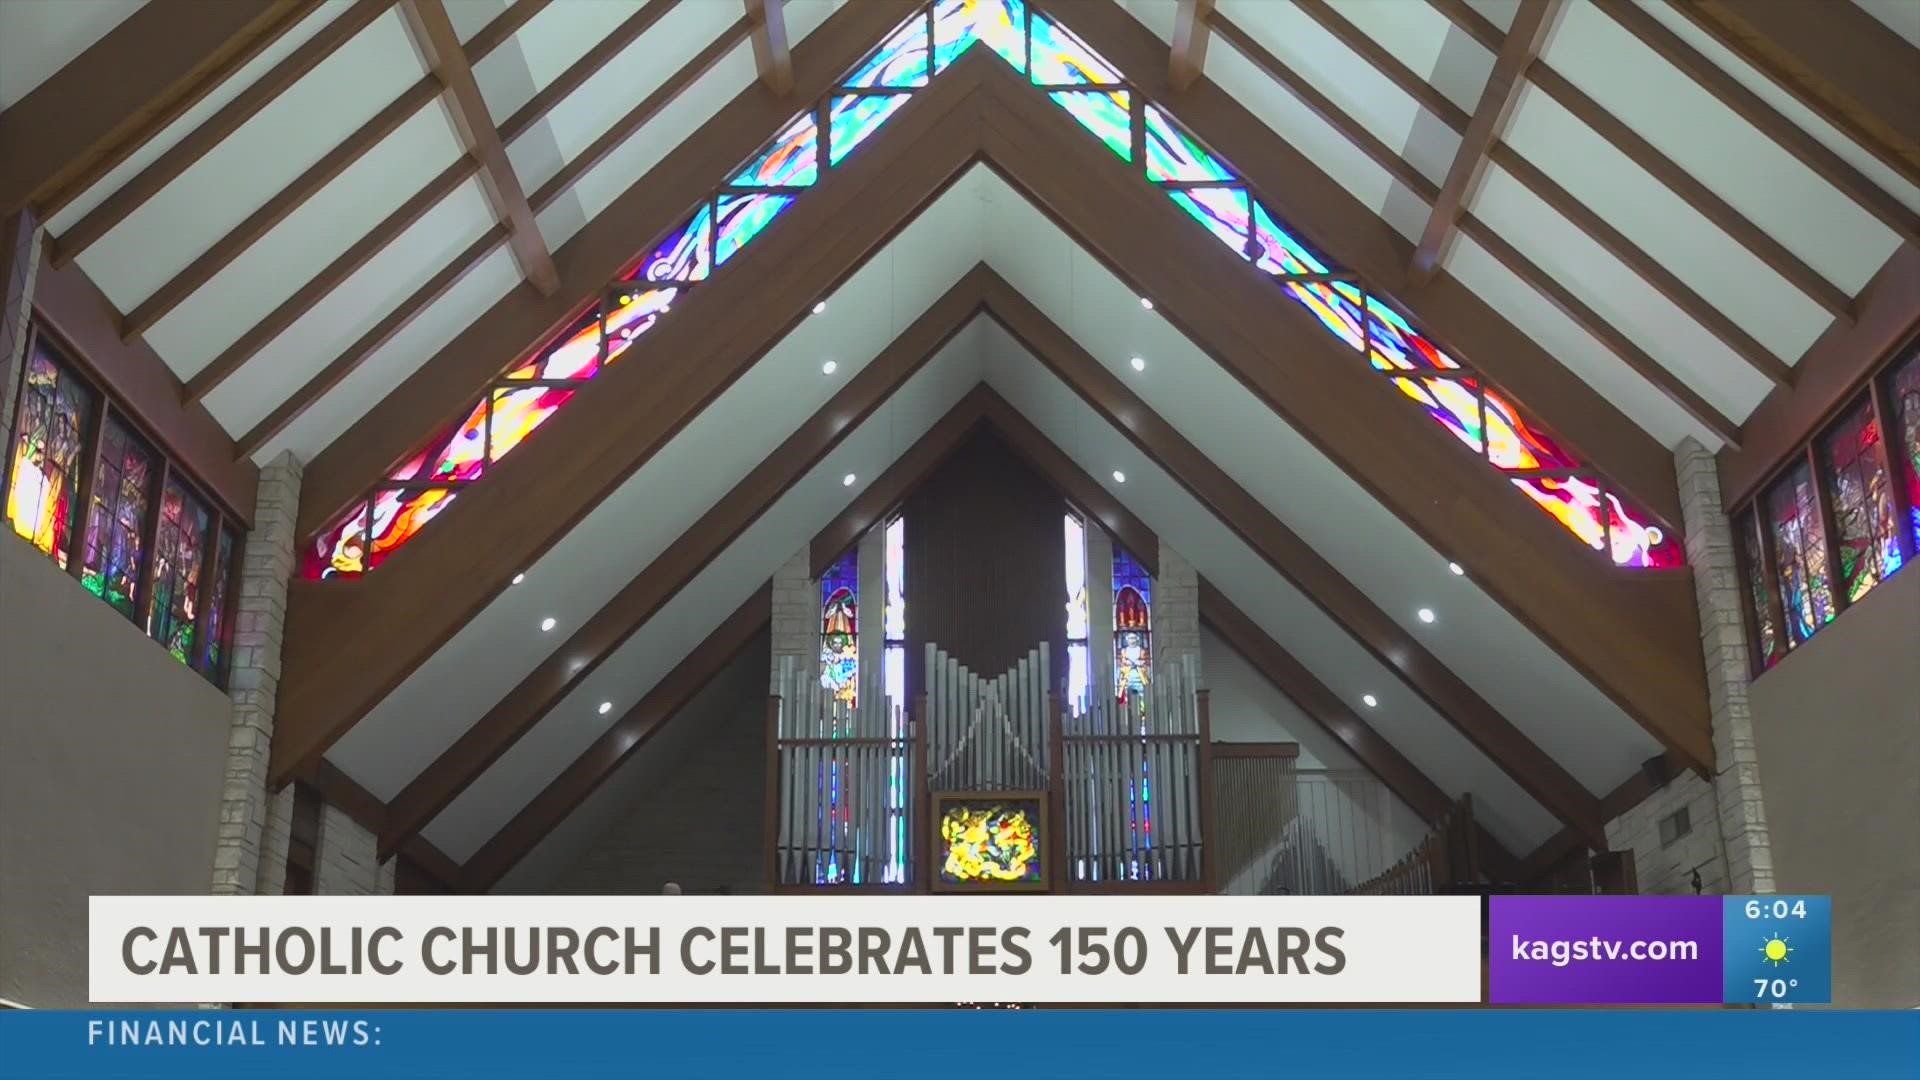 The Catholic Church in Bryan is celebrating its 150-year anniversary by highlighting its members and their history.